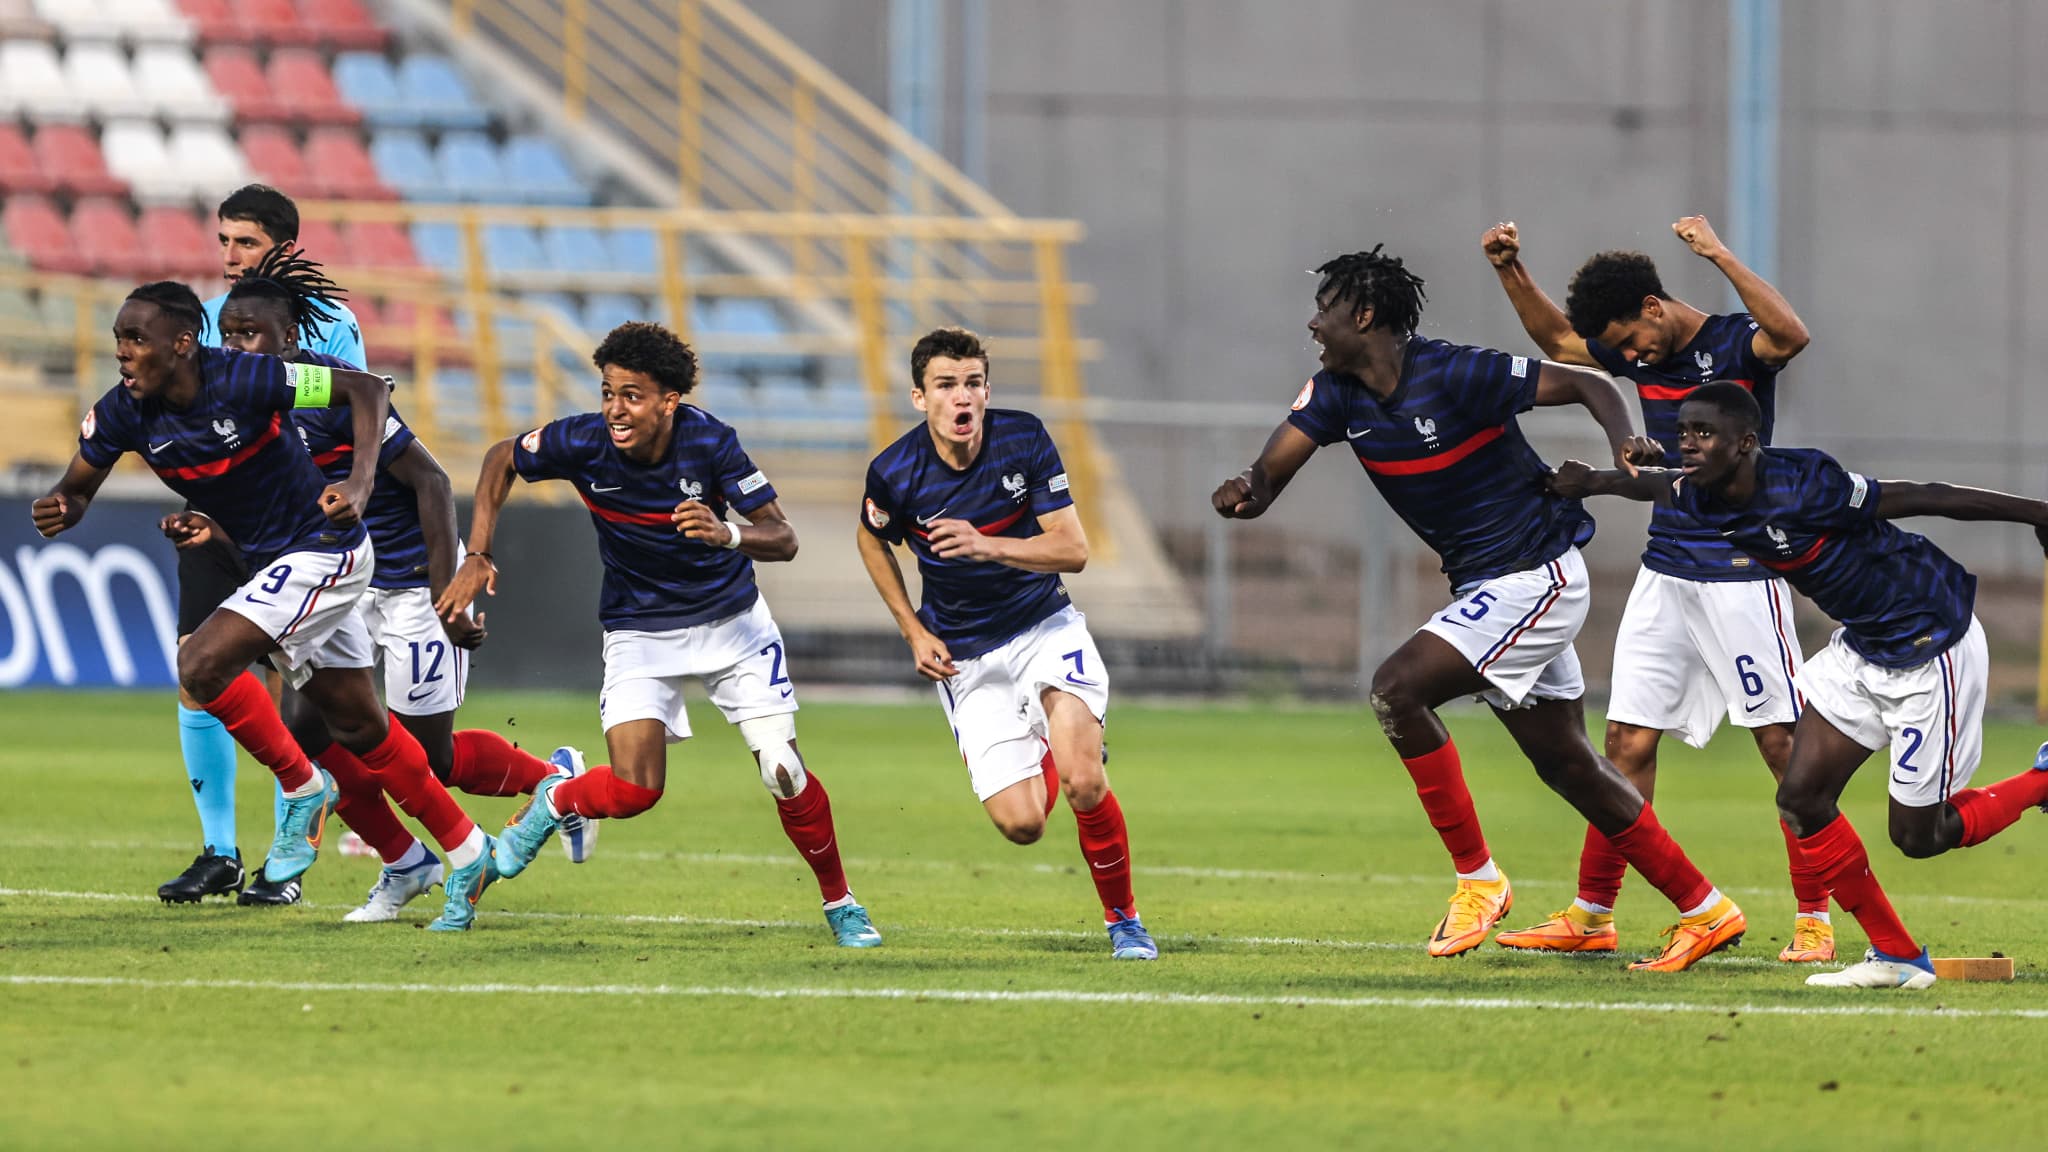 Zaire-Imre, Tel, Olmita … Before the final, these are the blueberries that shined during the UEFA European Under-17 Championship